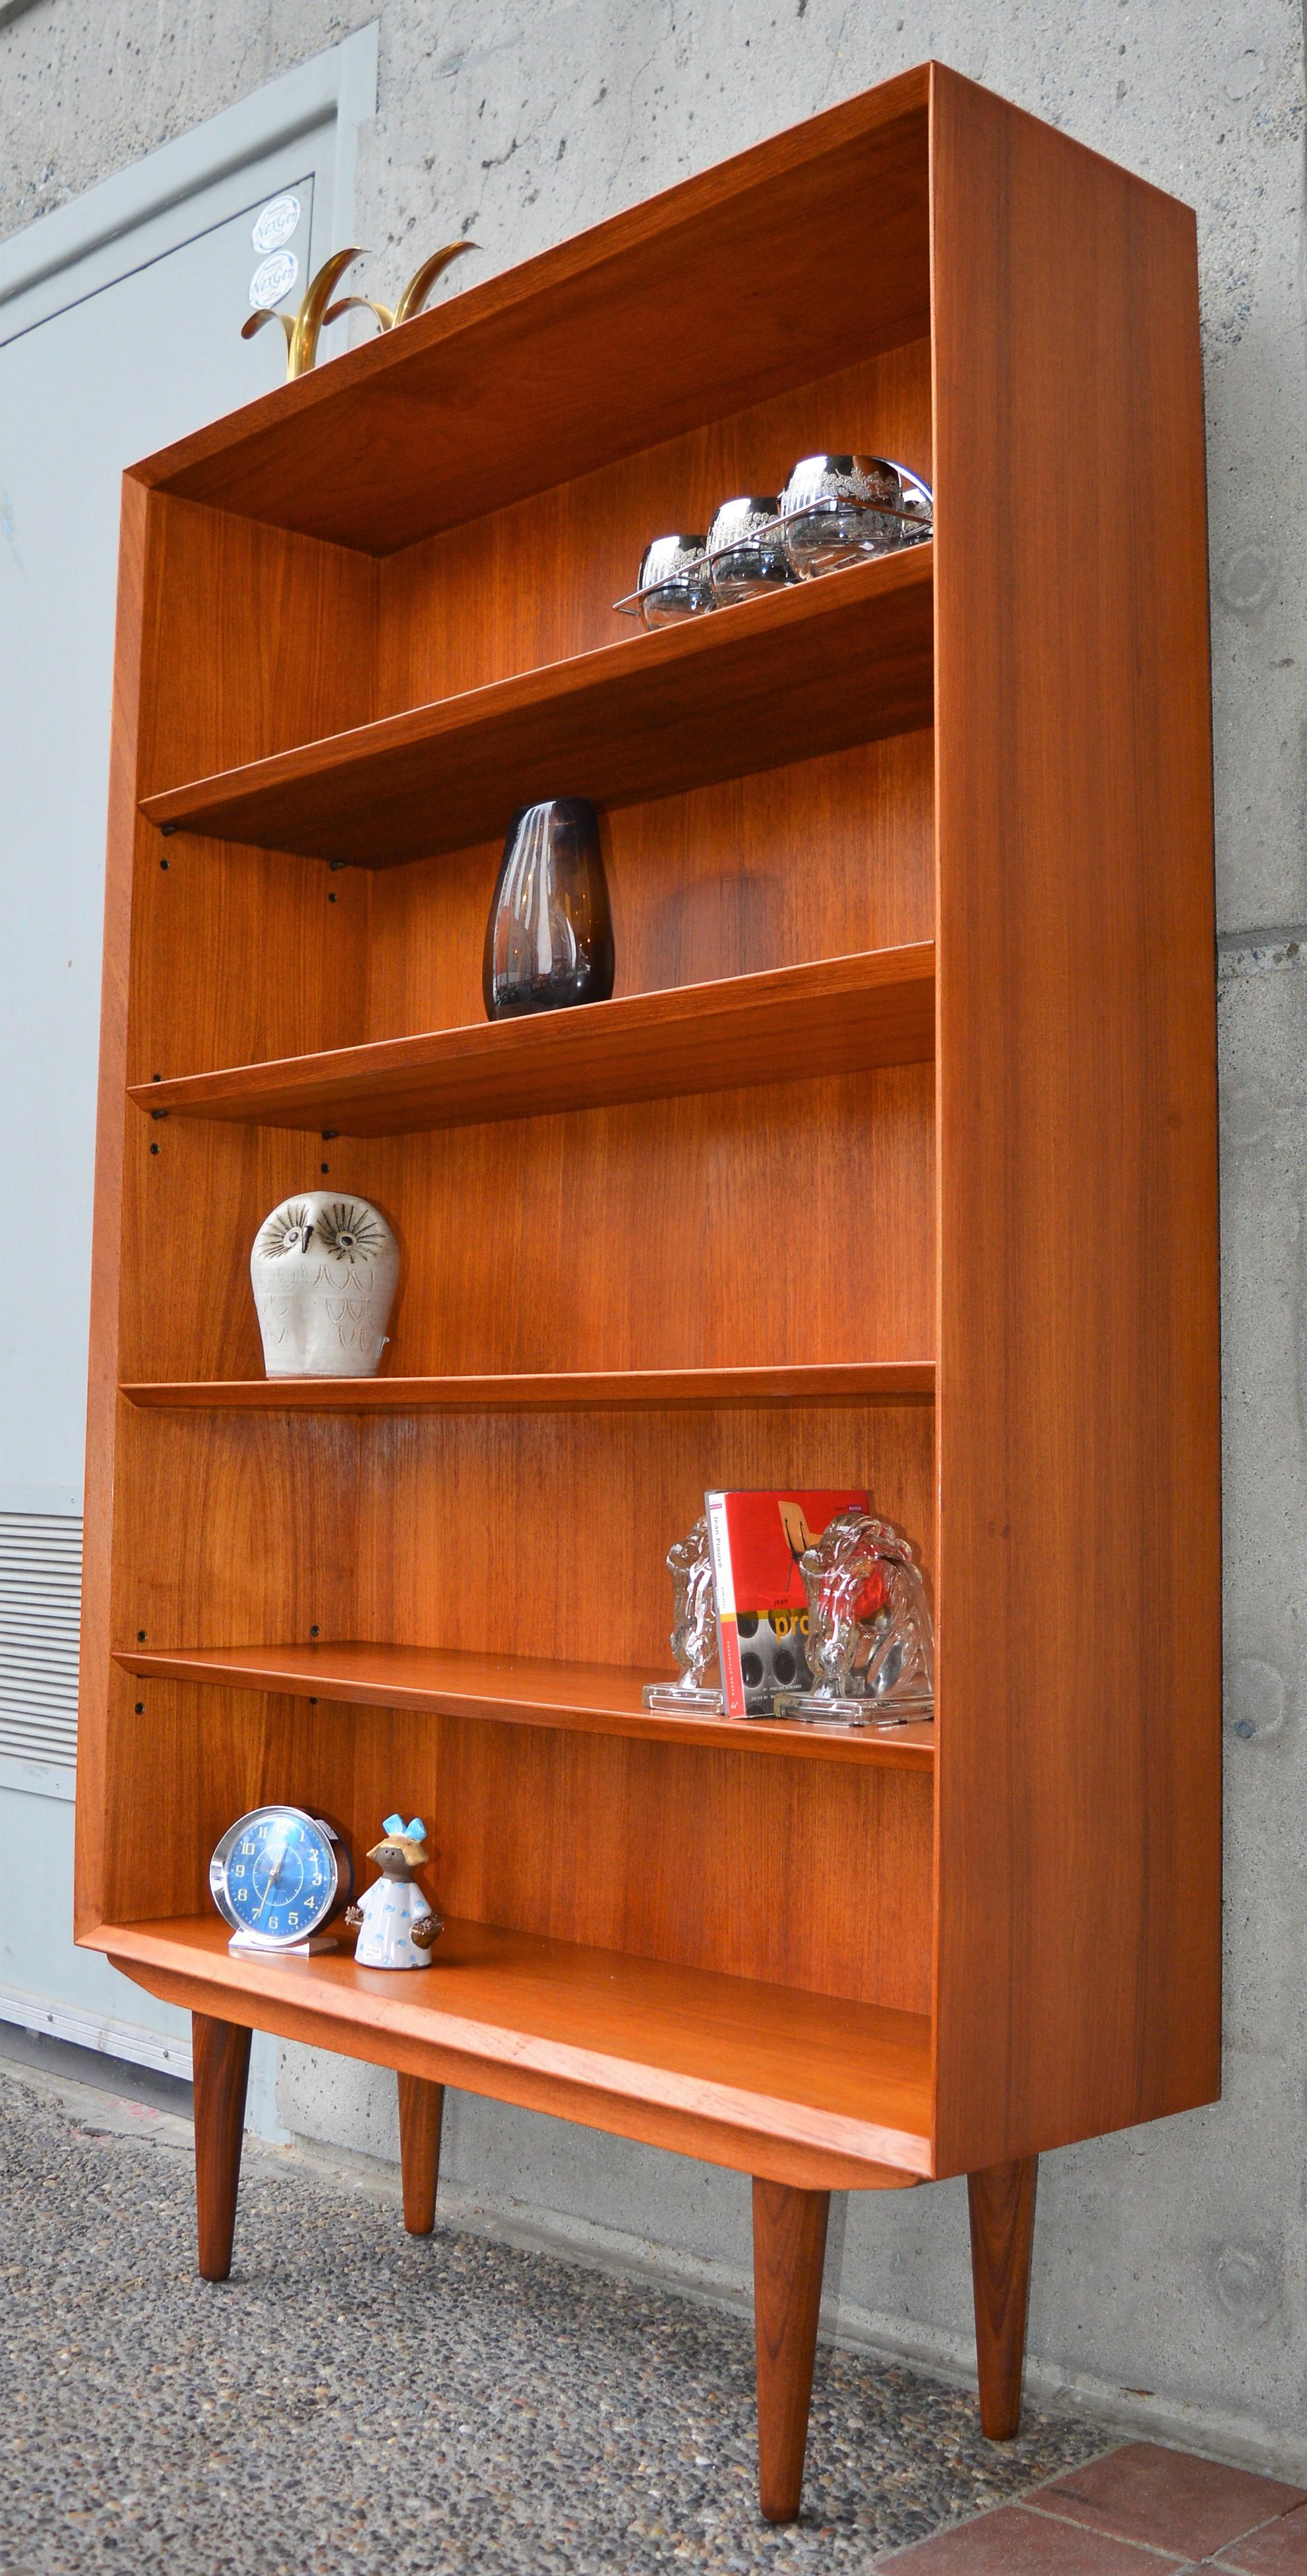 Mid-20th Century Danish Teak Bookcase/Shelf with Mitered Front, Angled Shelf Edges & Conical Legs